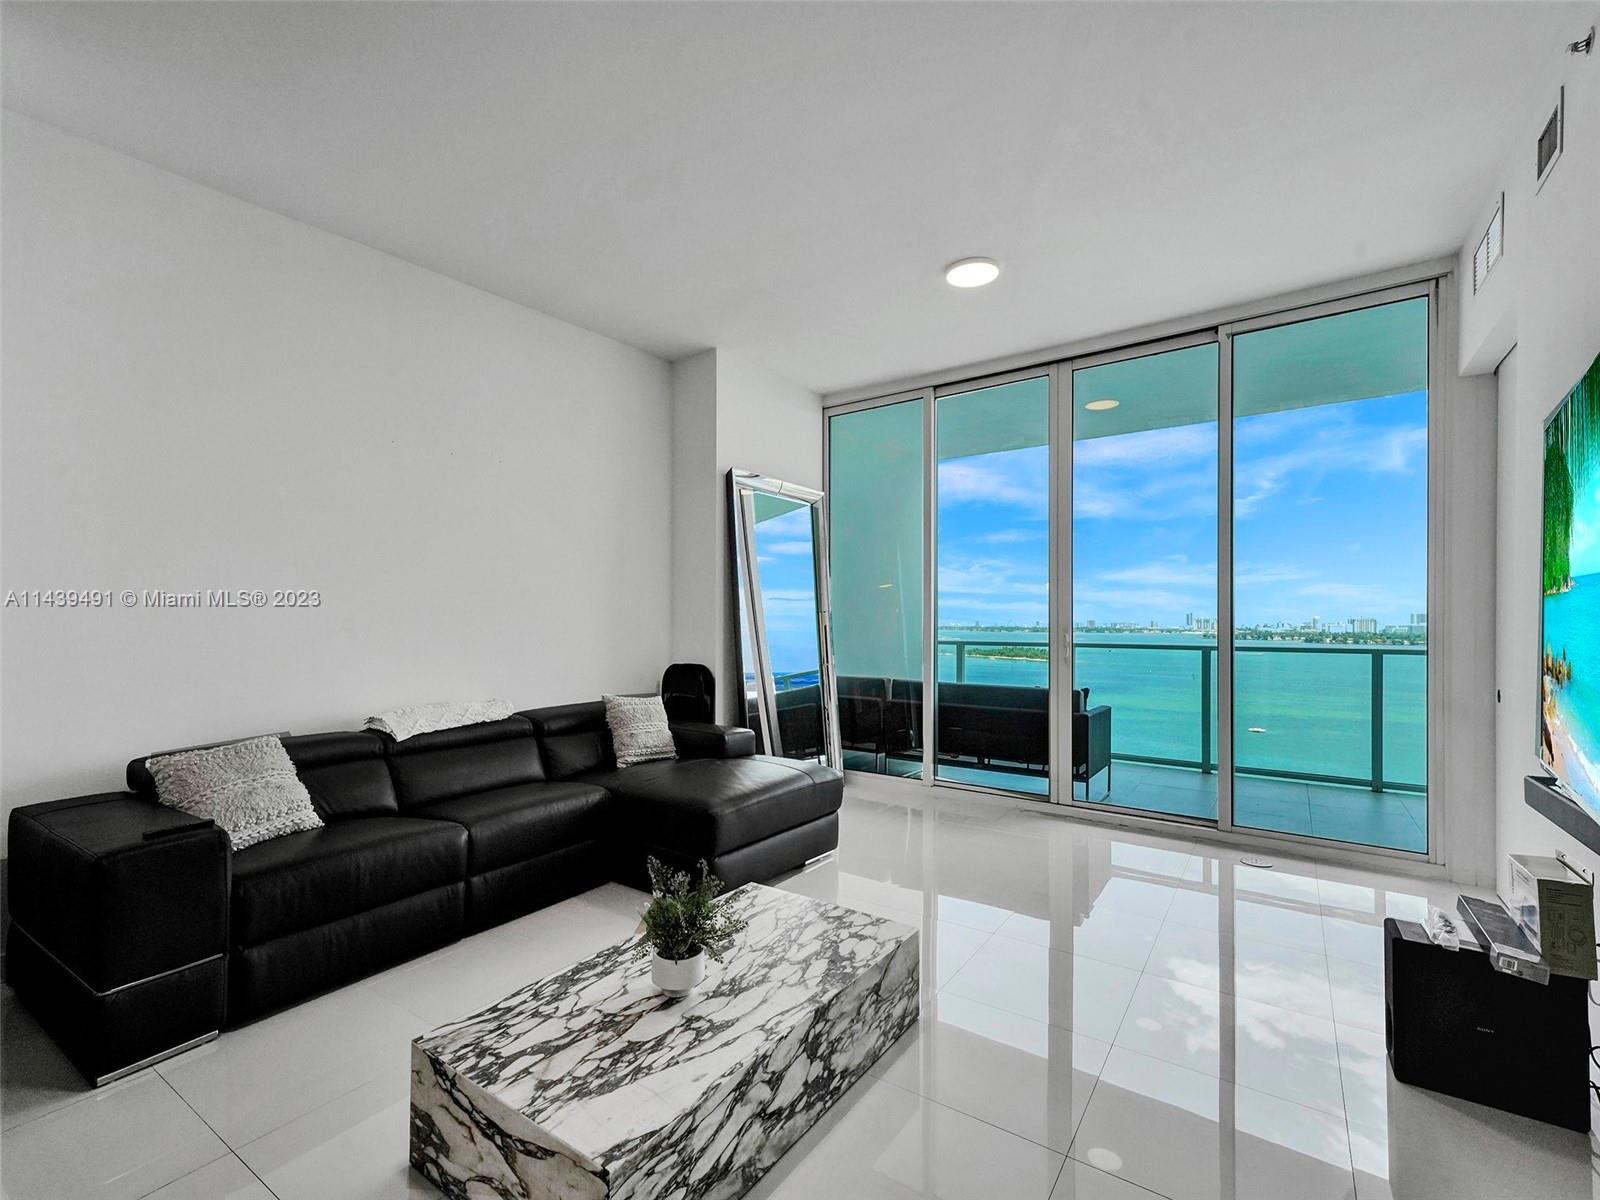 Welcome to Paramount Bay! This gorgeous 2 Bedroom/2 Bathroom unit features stunning Bay views from t